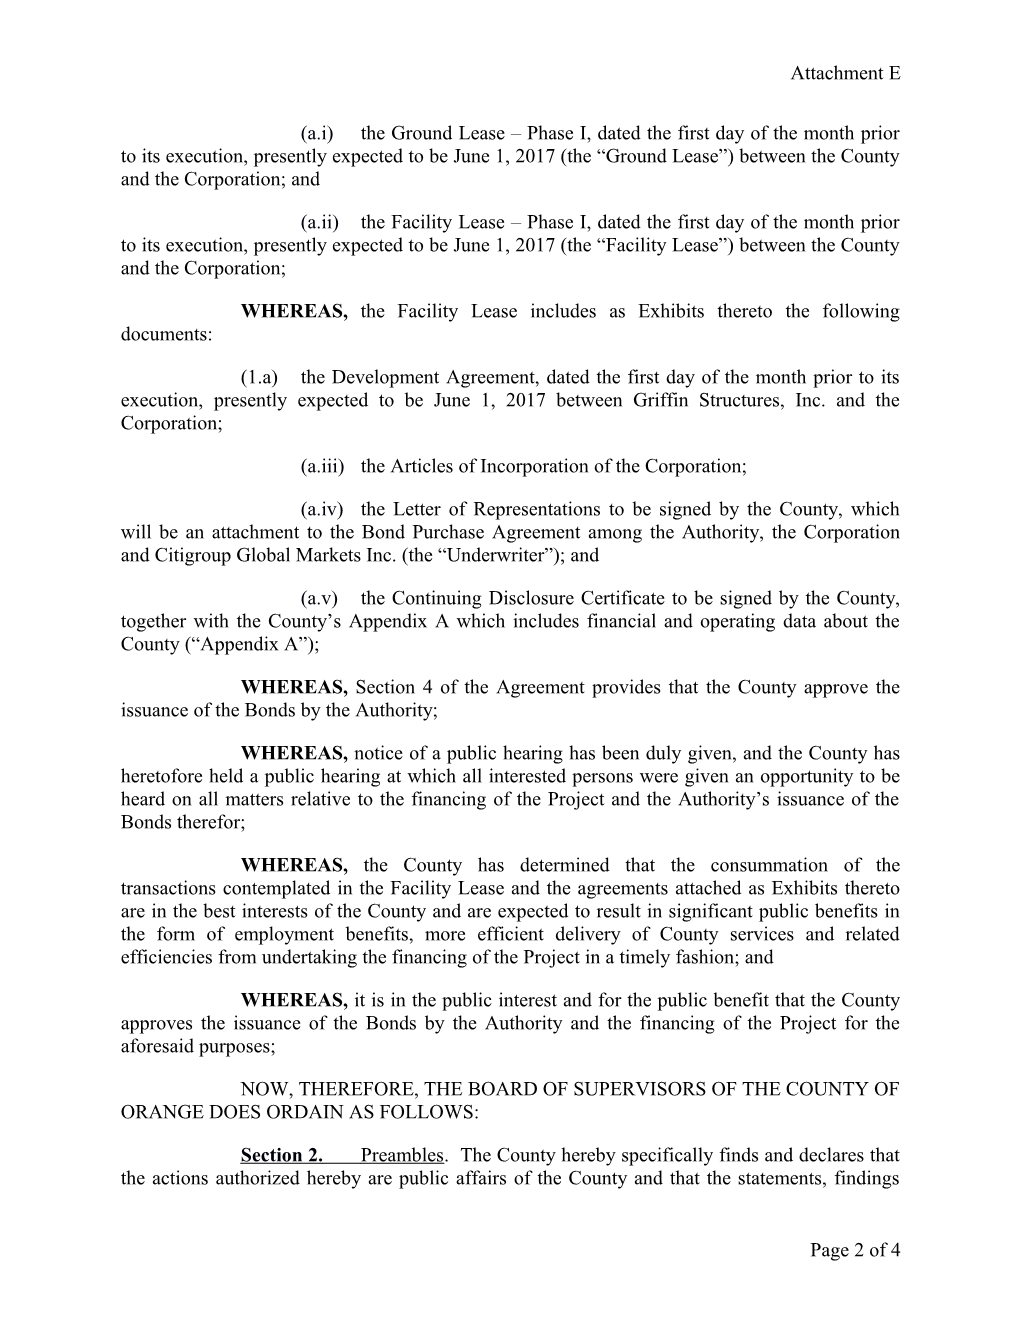 Anordinance of the Board of Supervisors of the County of Orange Authorizing the Execution